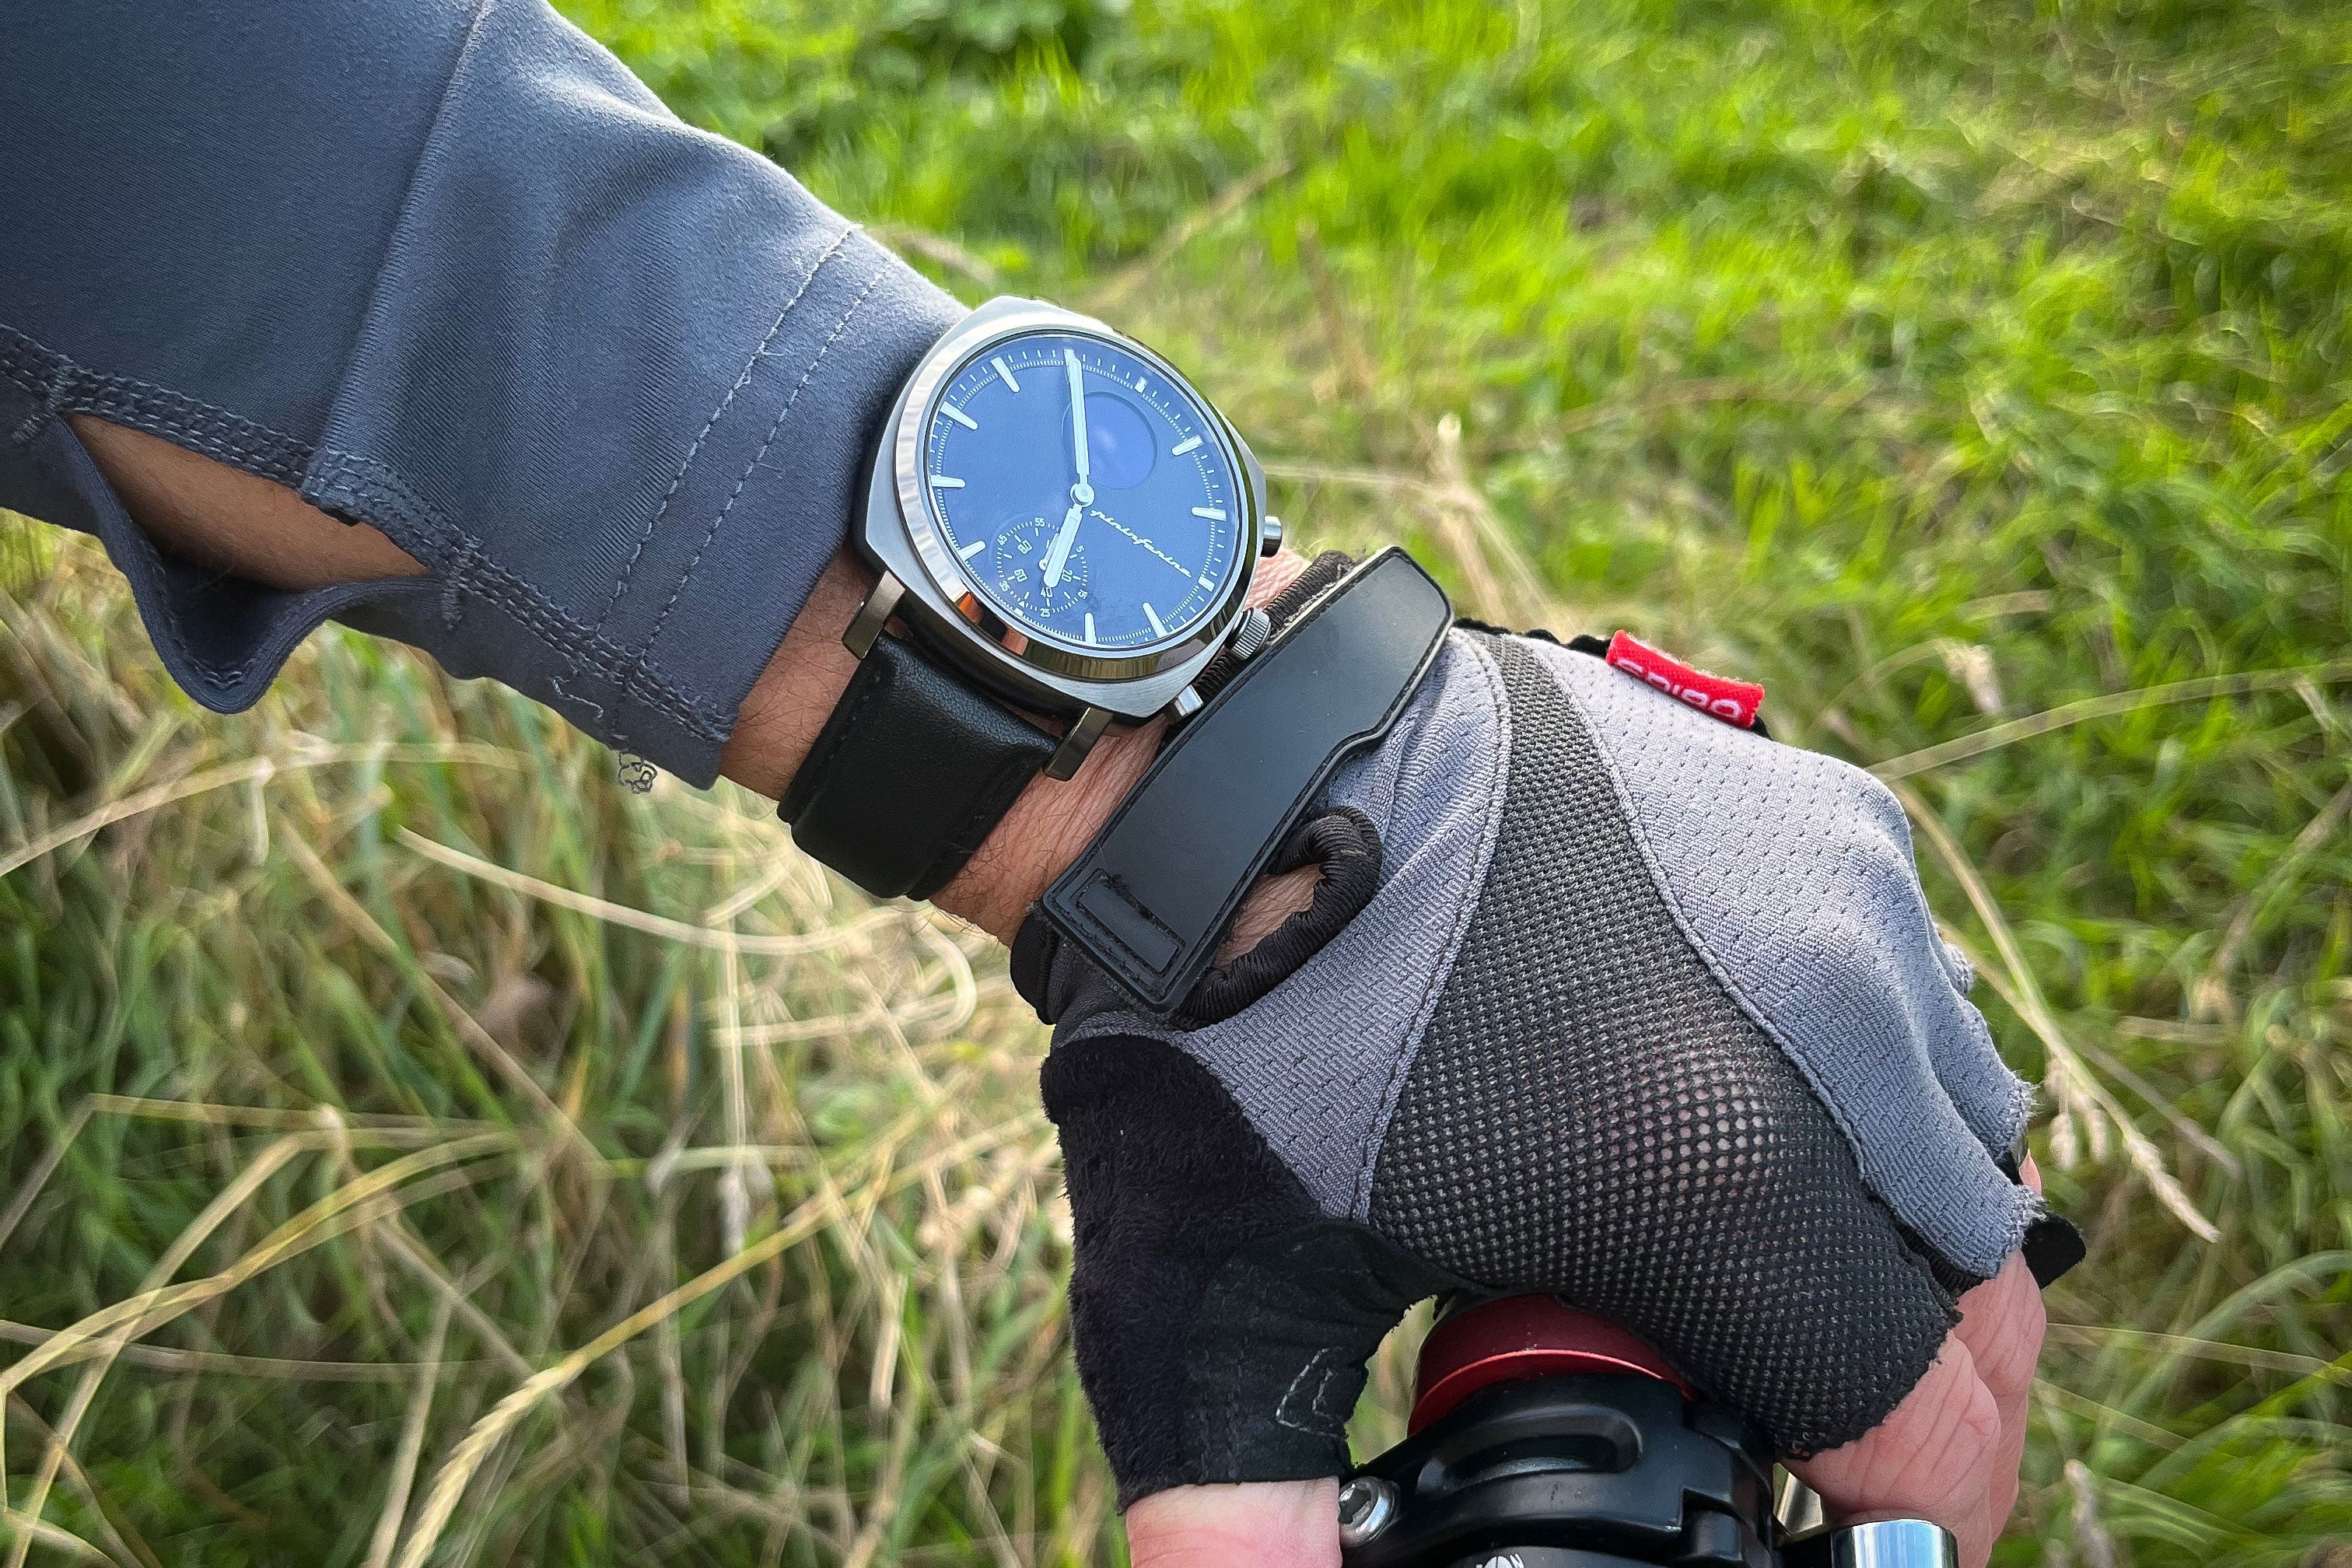 Nick wears the Pininfarina Senso Hybrid smartwatch in Slate Grey. The watch is also available in Moonlight Silver, Mercure Grey and Sunburst Rose Gold. 
